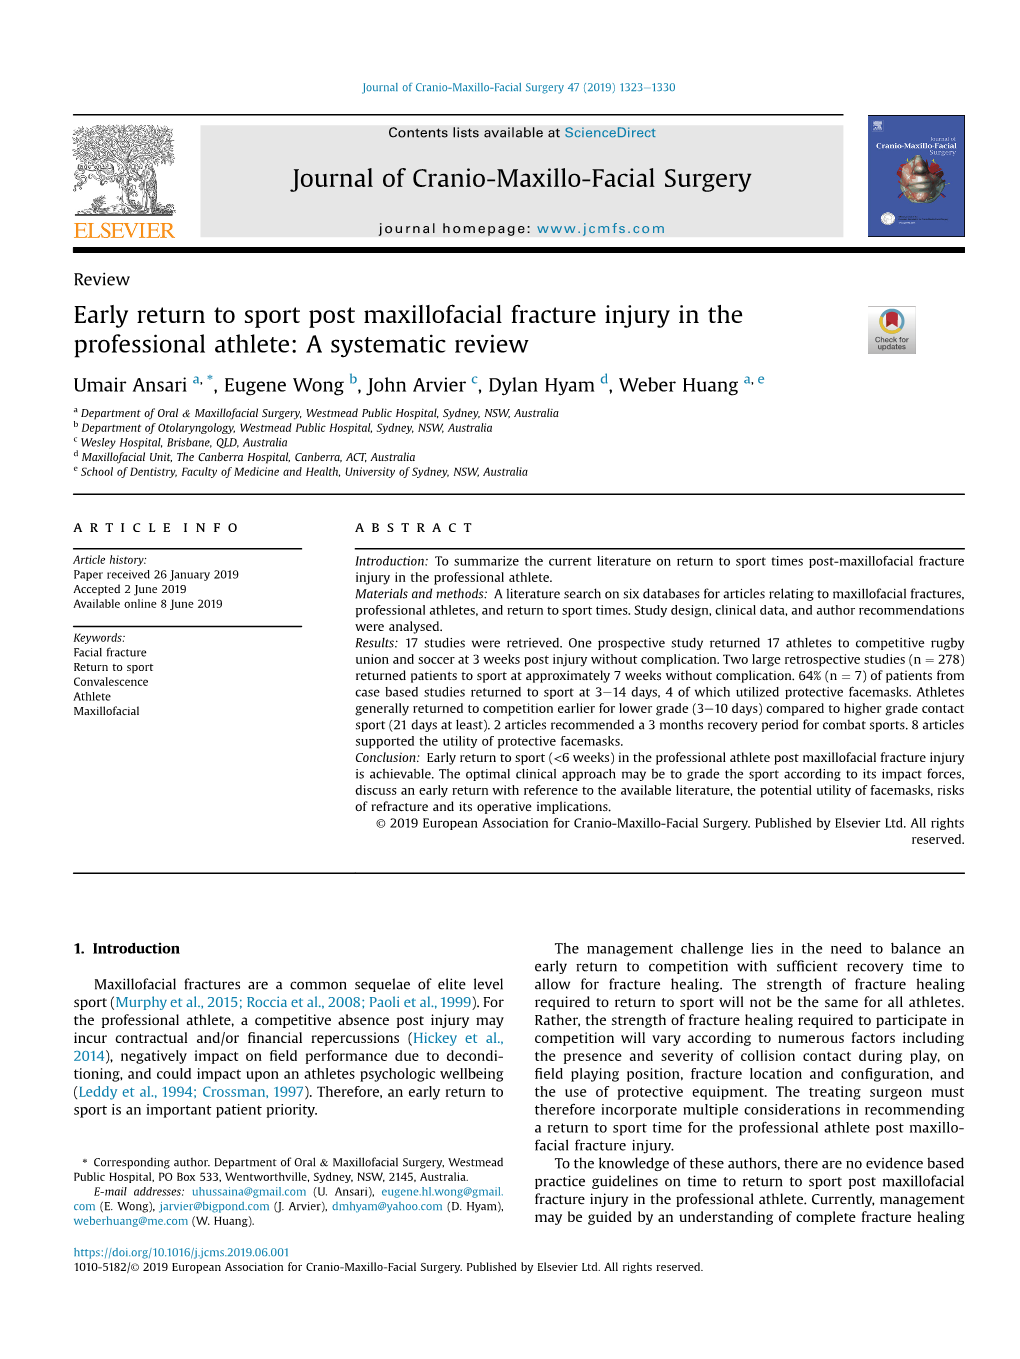 Early Return to Sport Post Maxillofacial Fracture Injury in the Professional Athlete: a Systematic Review